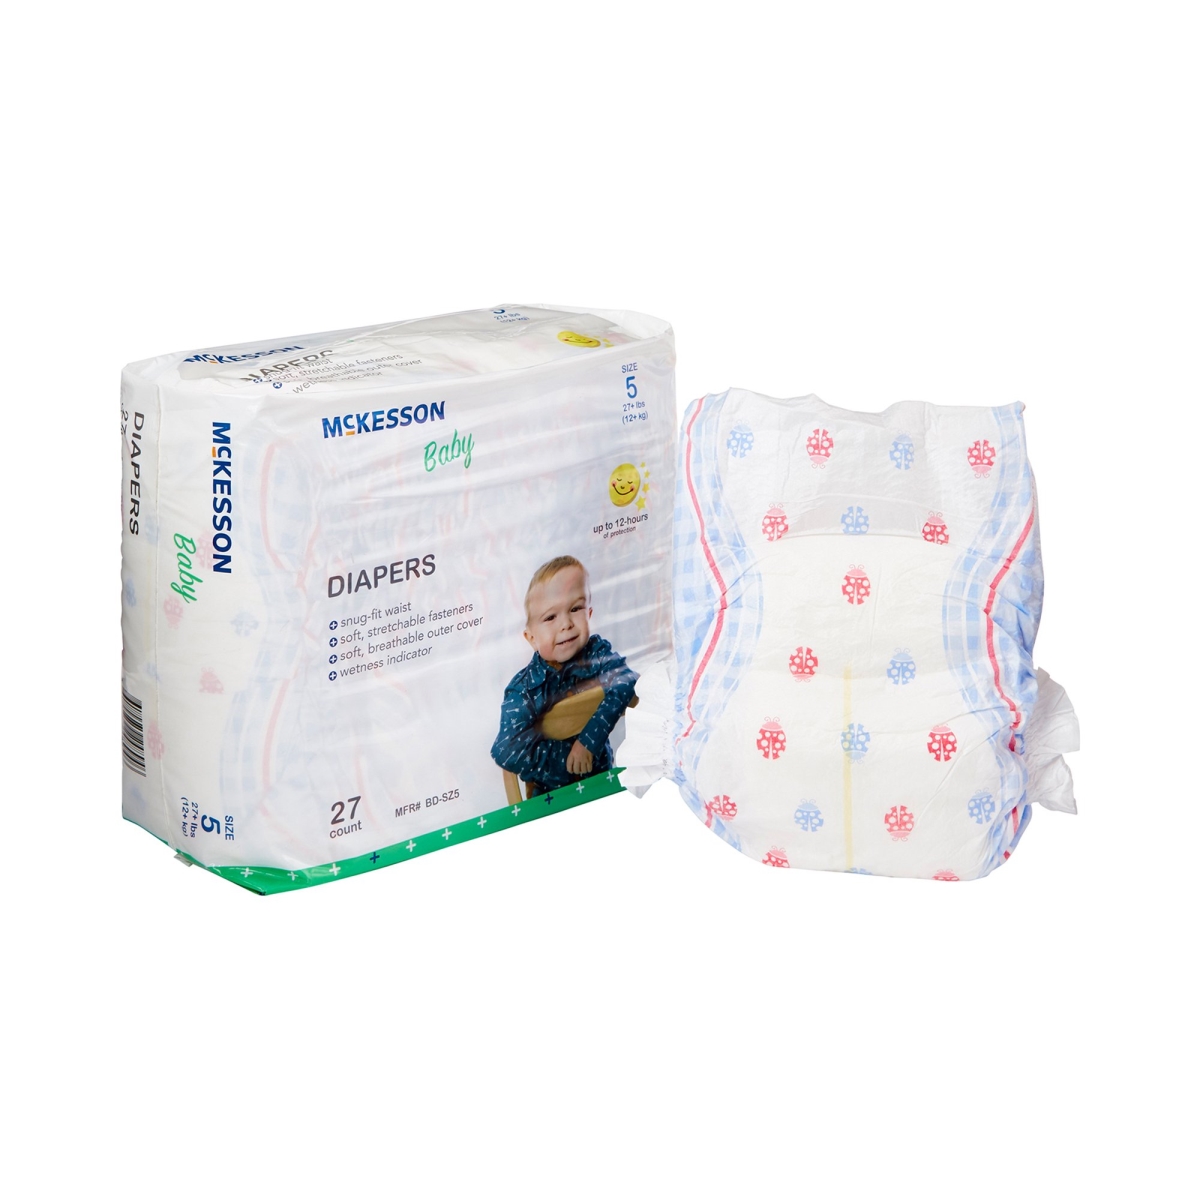 Picture of Drylock Technologies 1144478-BG 27 lbs Baby Diaper - Size 5 - 4 per Case - Pack of 27